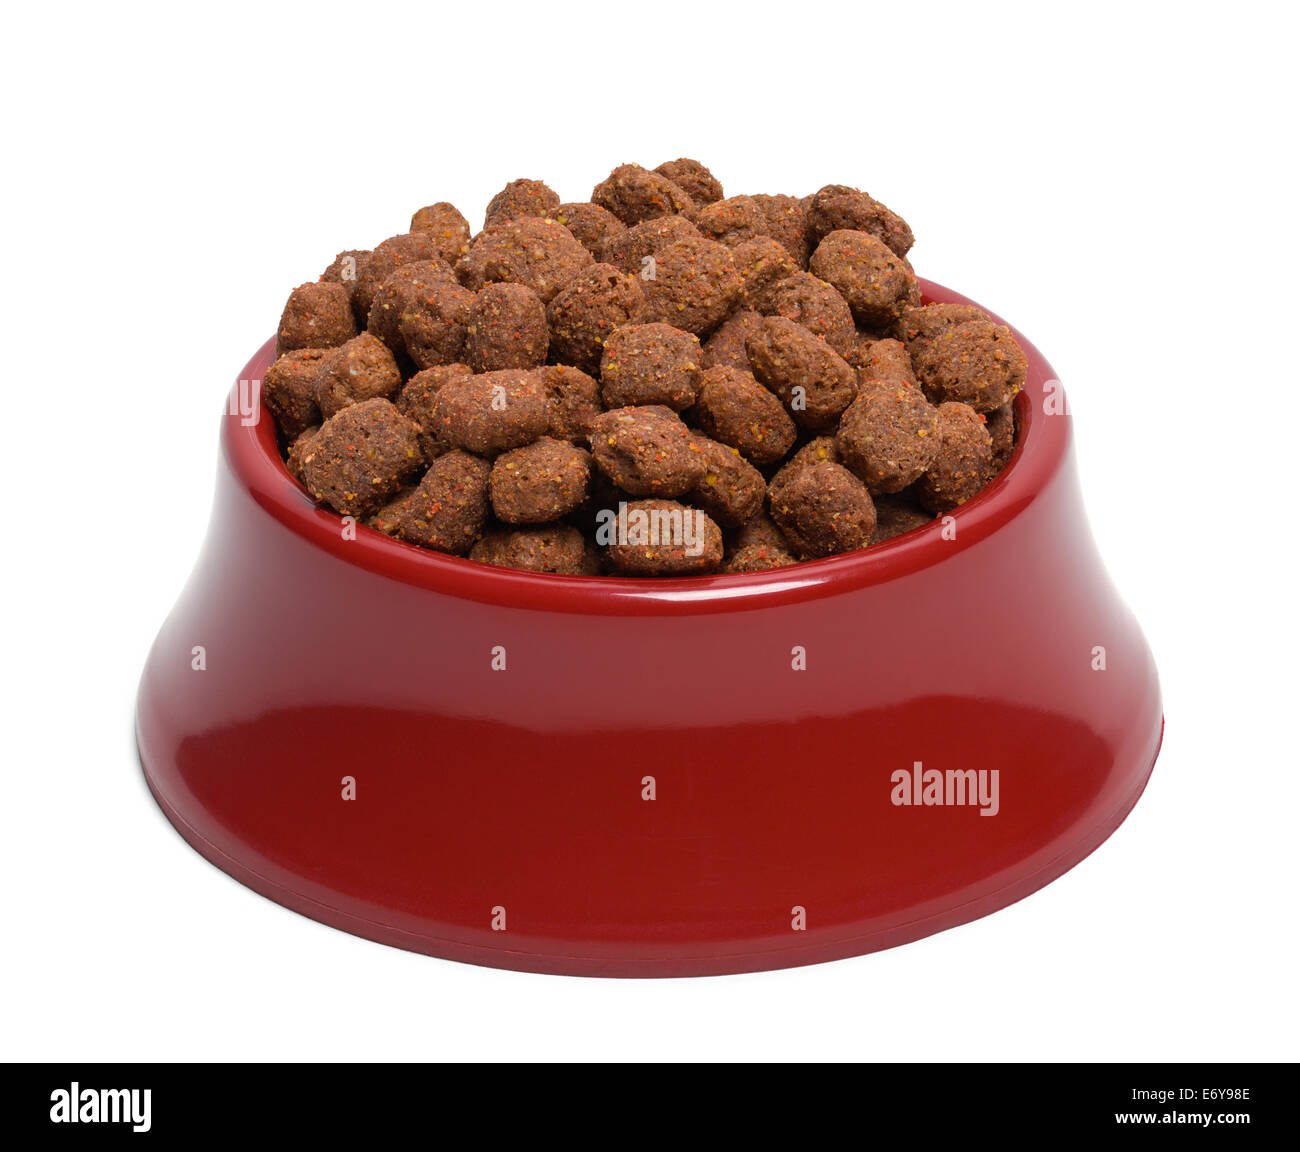 Red Bowl of Dog Food Isolated on White Background. Stock Photo